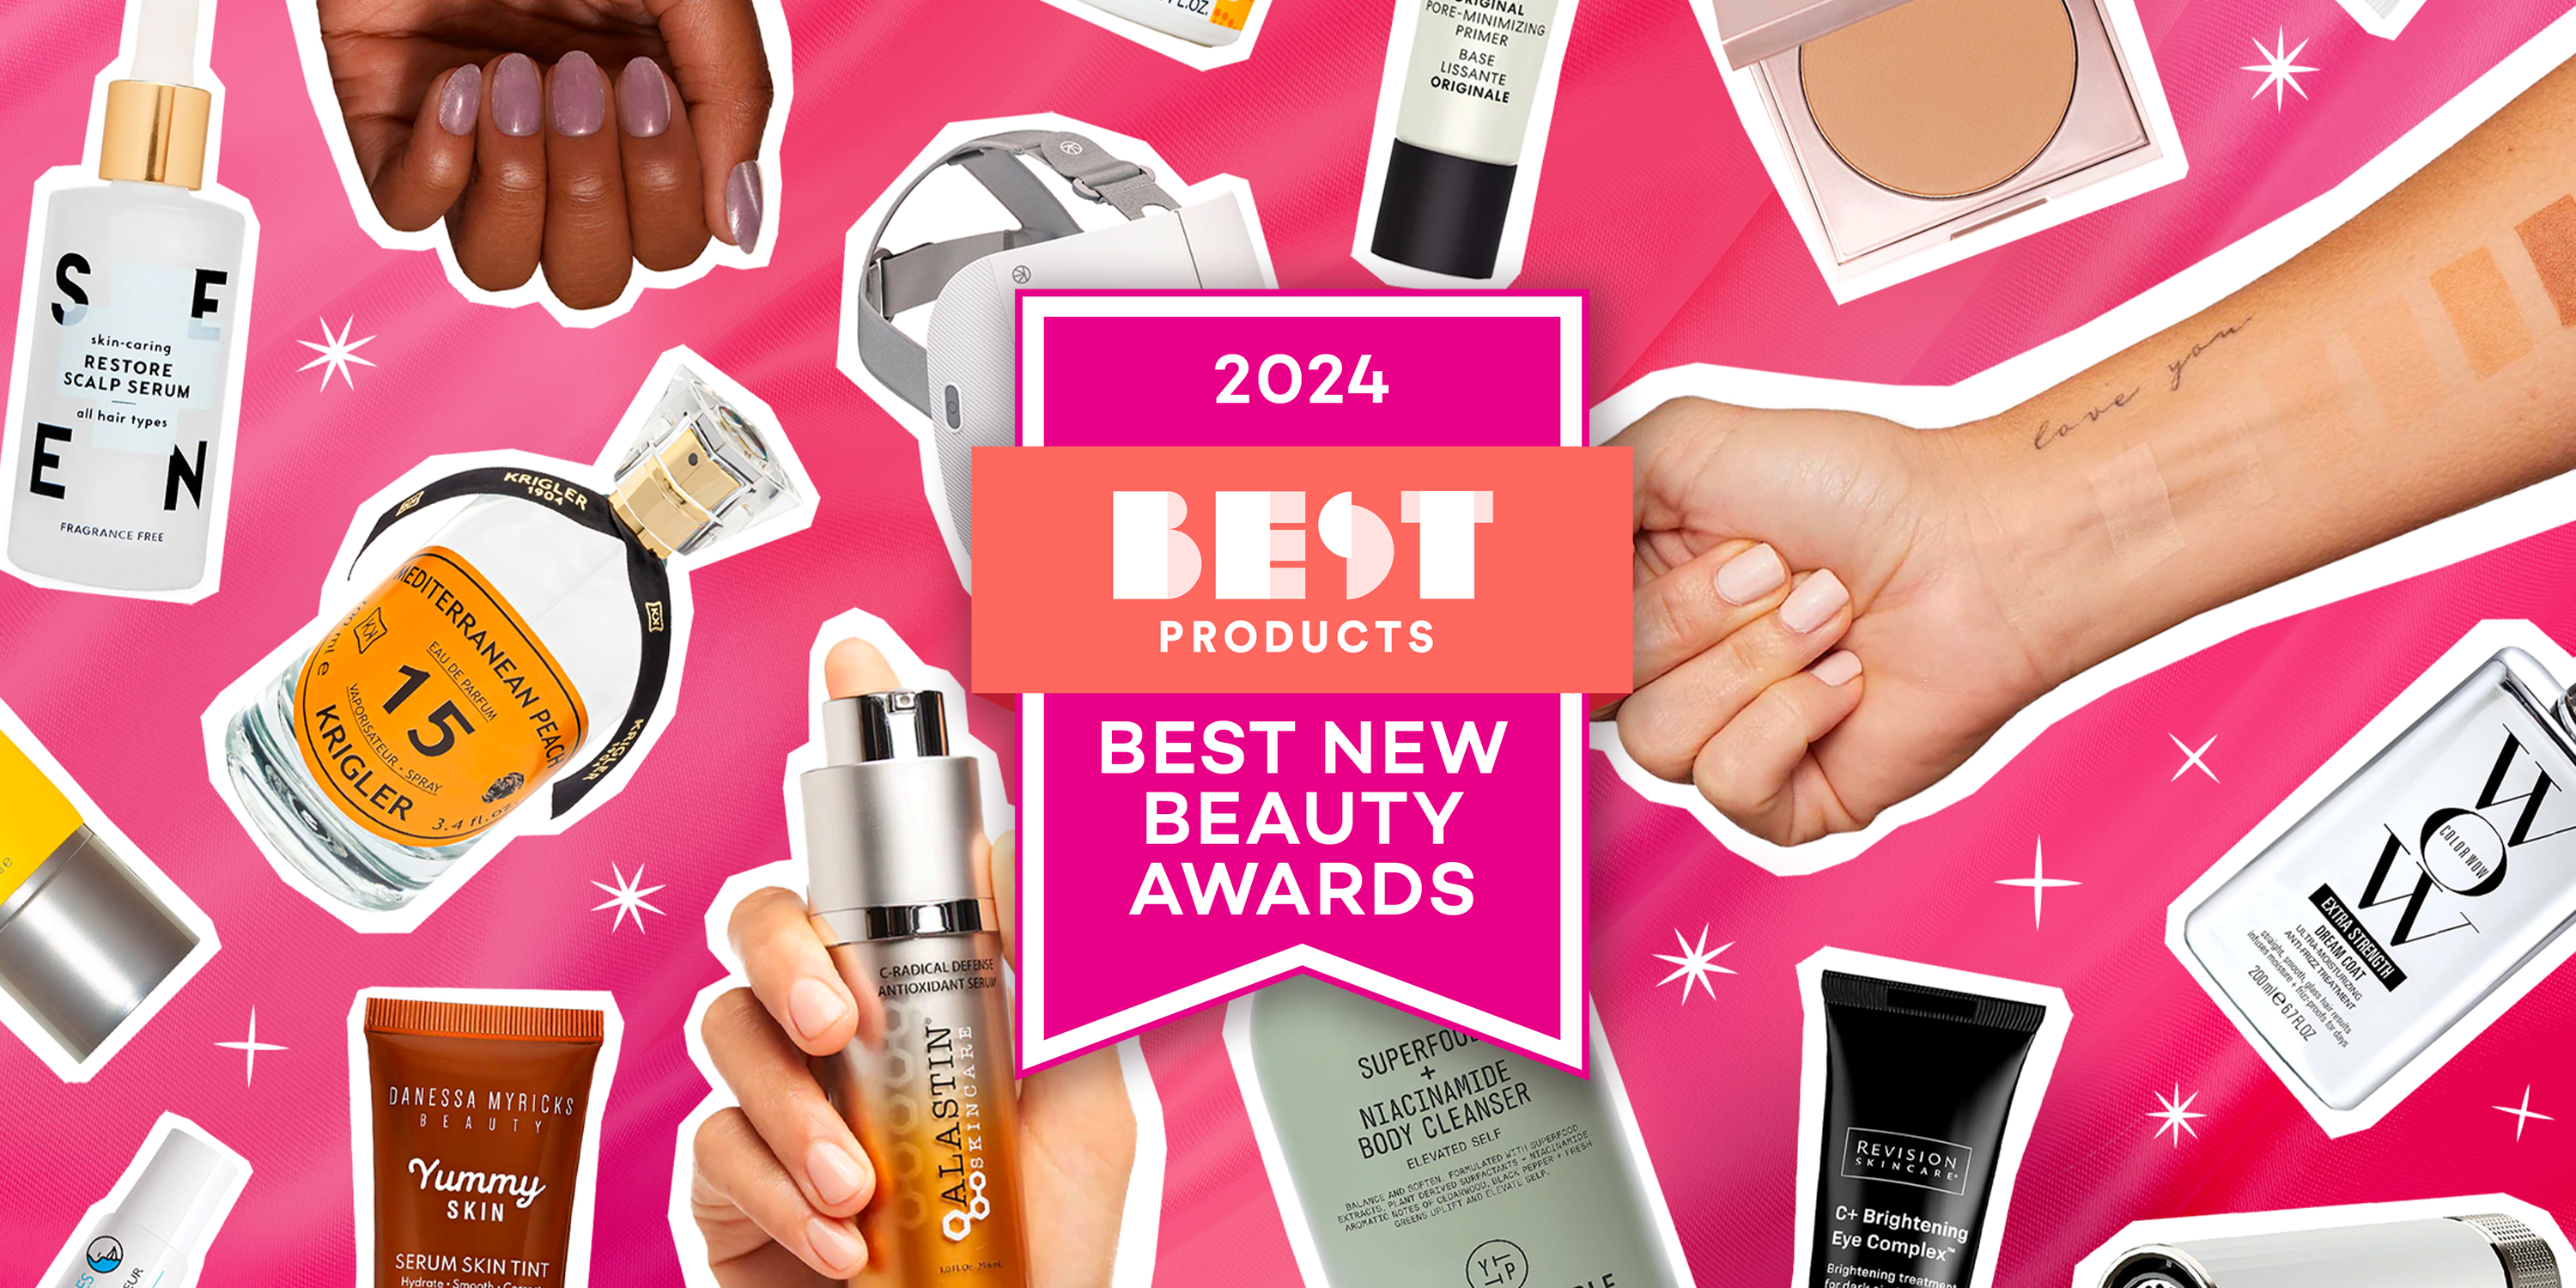 These  beauty products have amazing *INSTANT* results!⏱️ #